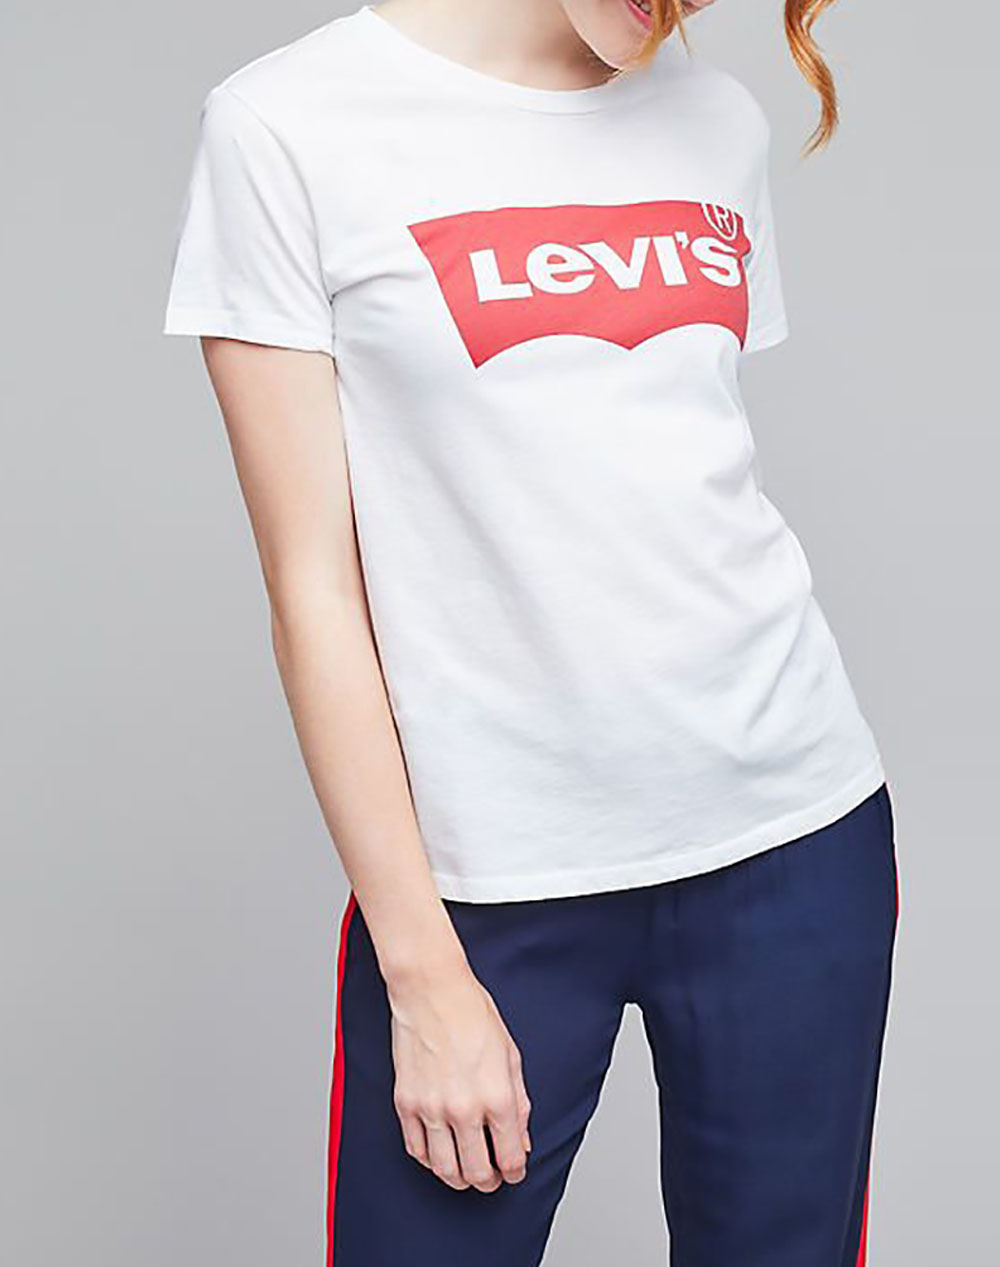 LEVIS ΜΠΛΟΥΖΑ T-SHIRT THE PERFECT TEE 17369-0053-0053 White